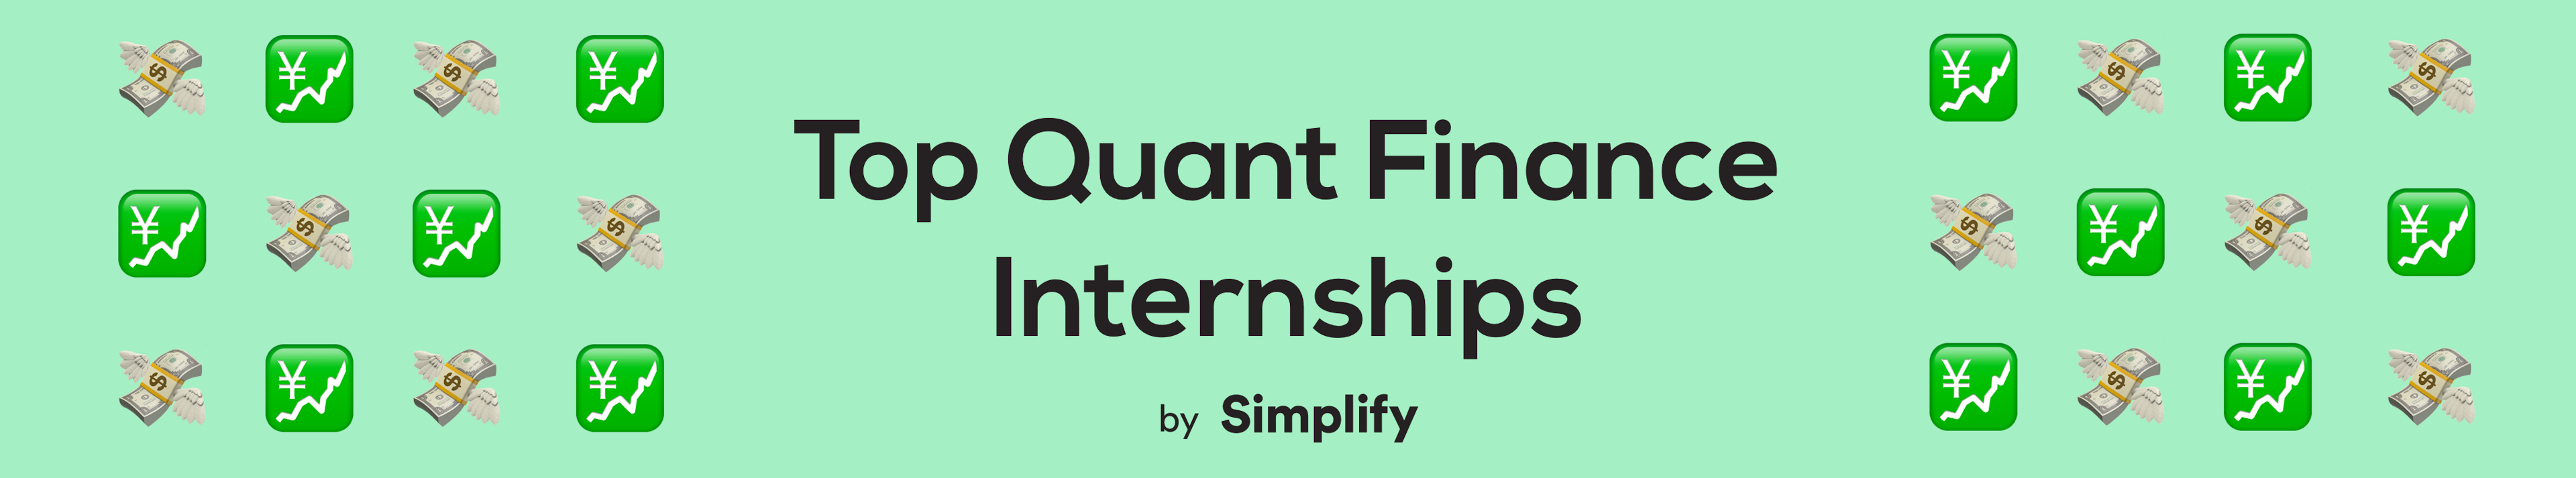 text that says “Top Quant Finance Internships by Simplify” surrounded by money and rising graph emojis